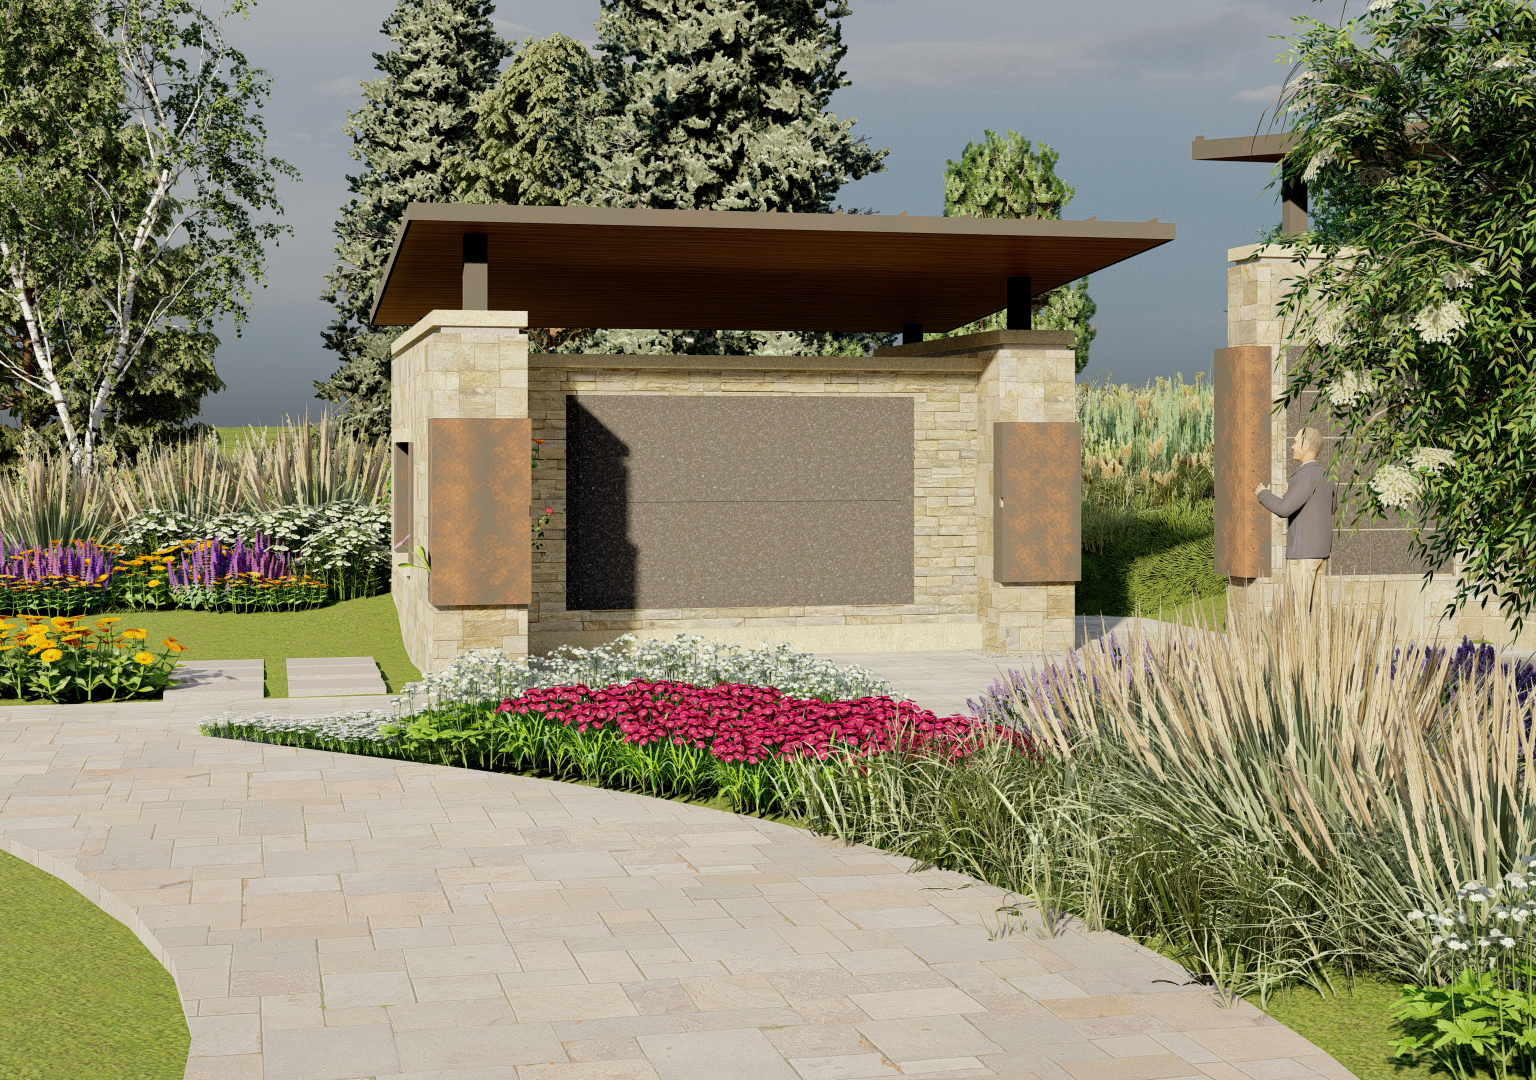 Mausoleum plans at Seven Stones Chatfield, a new age cemetery in Colorado